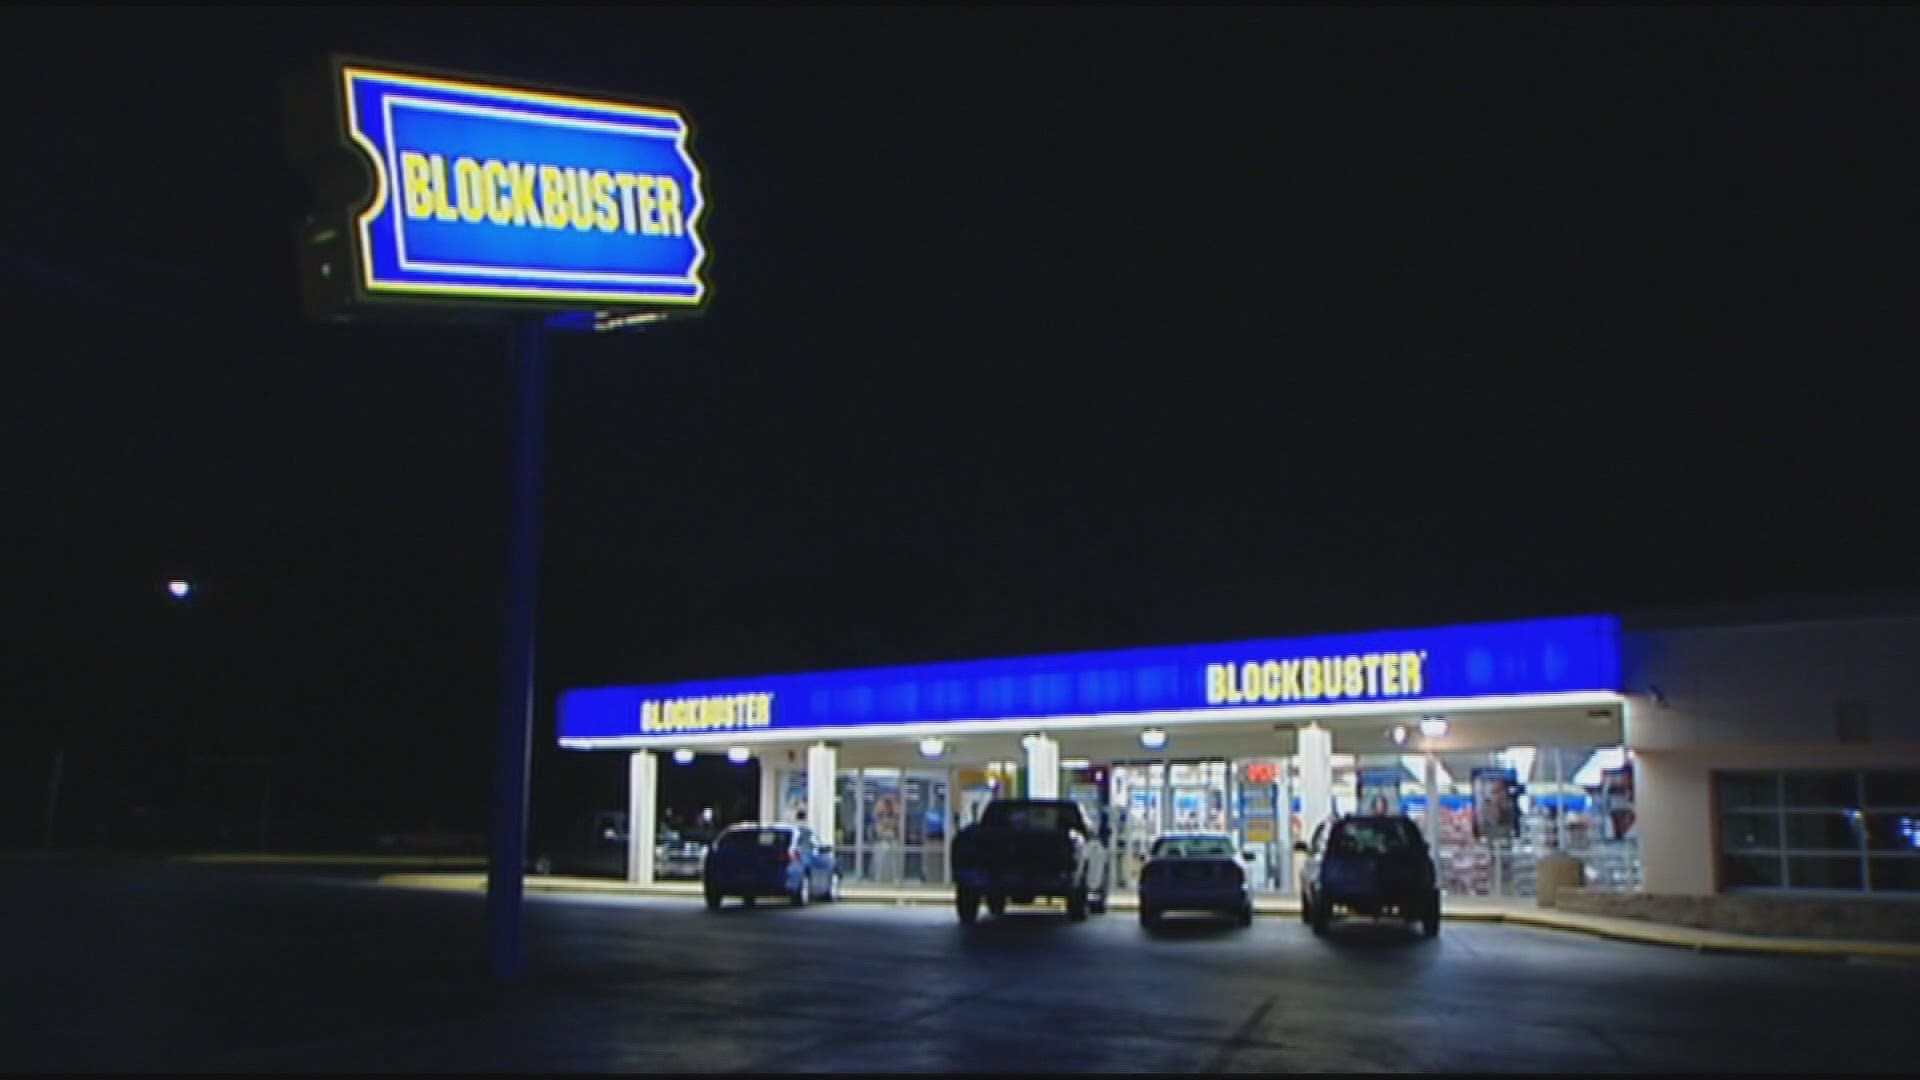 The first Blockbuster opened in Dallas in 1985. The new documentary 'The Last Blockbuster' focuses on the company's rise, fall, and the last store in America.